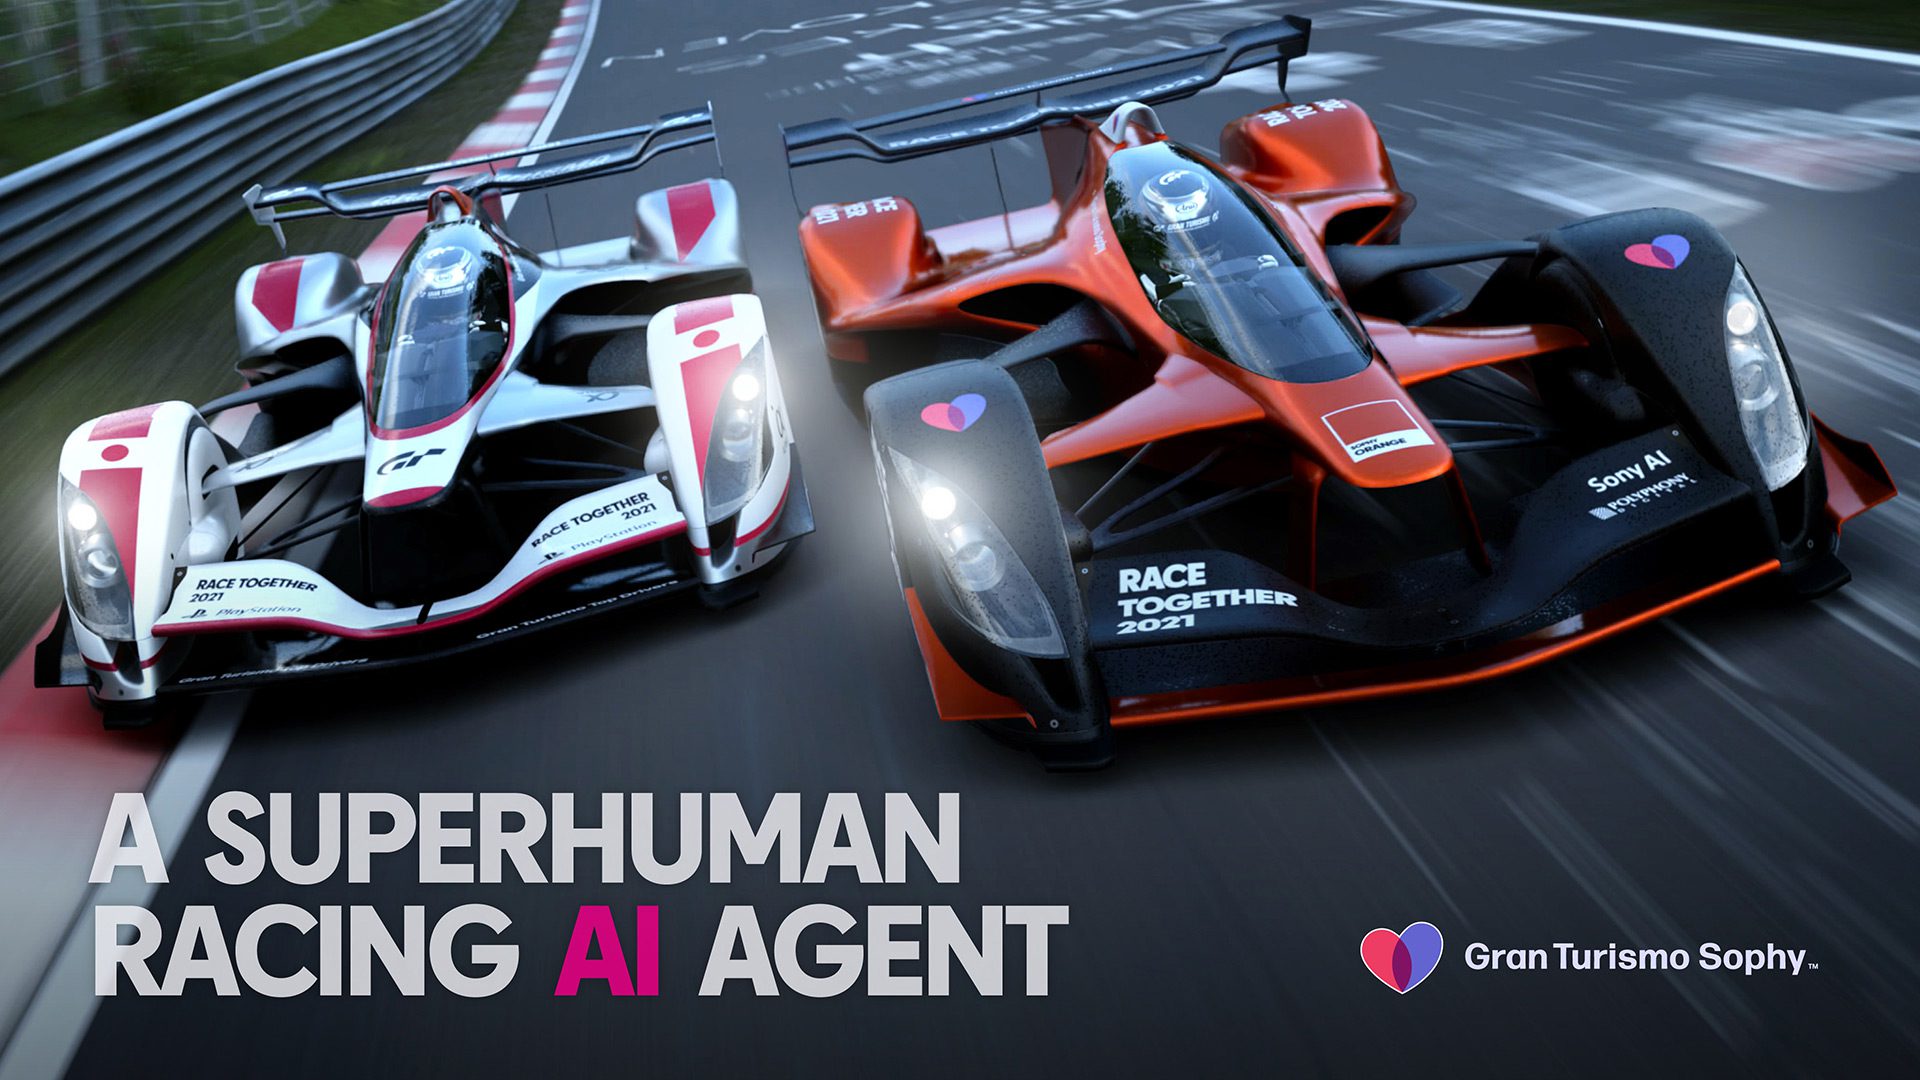 Gran Turismo's new AI called Sophy